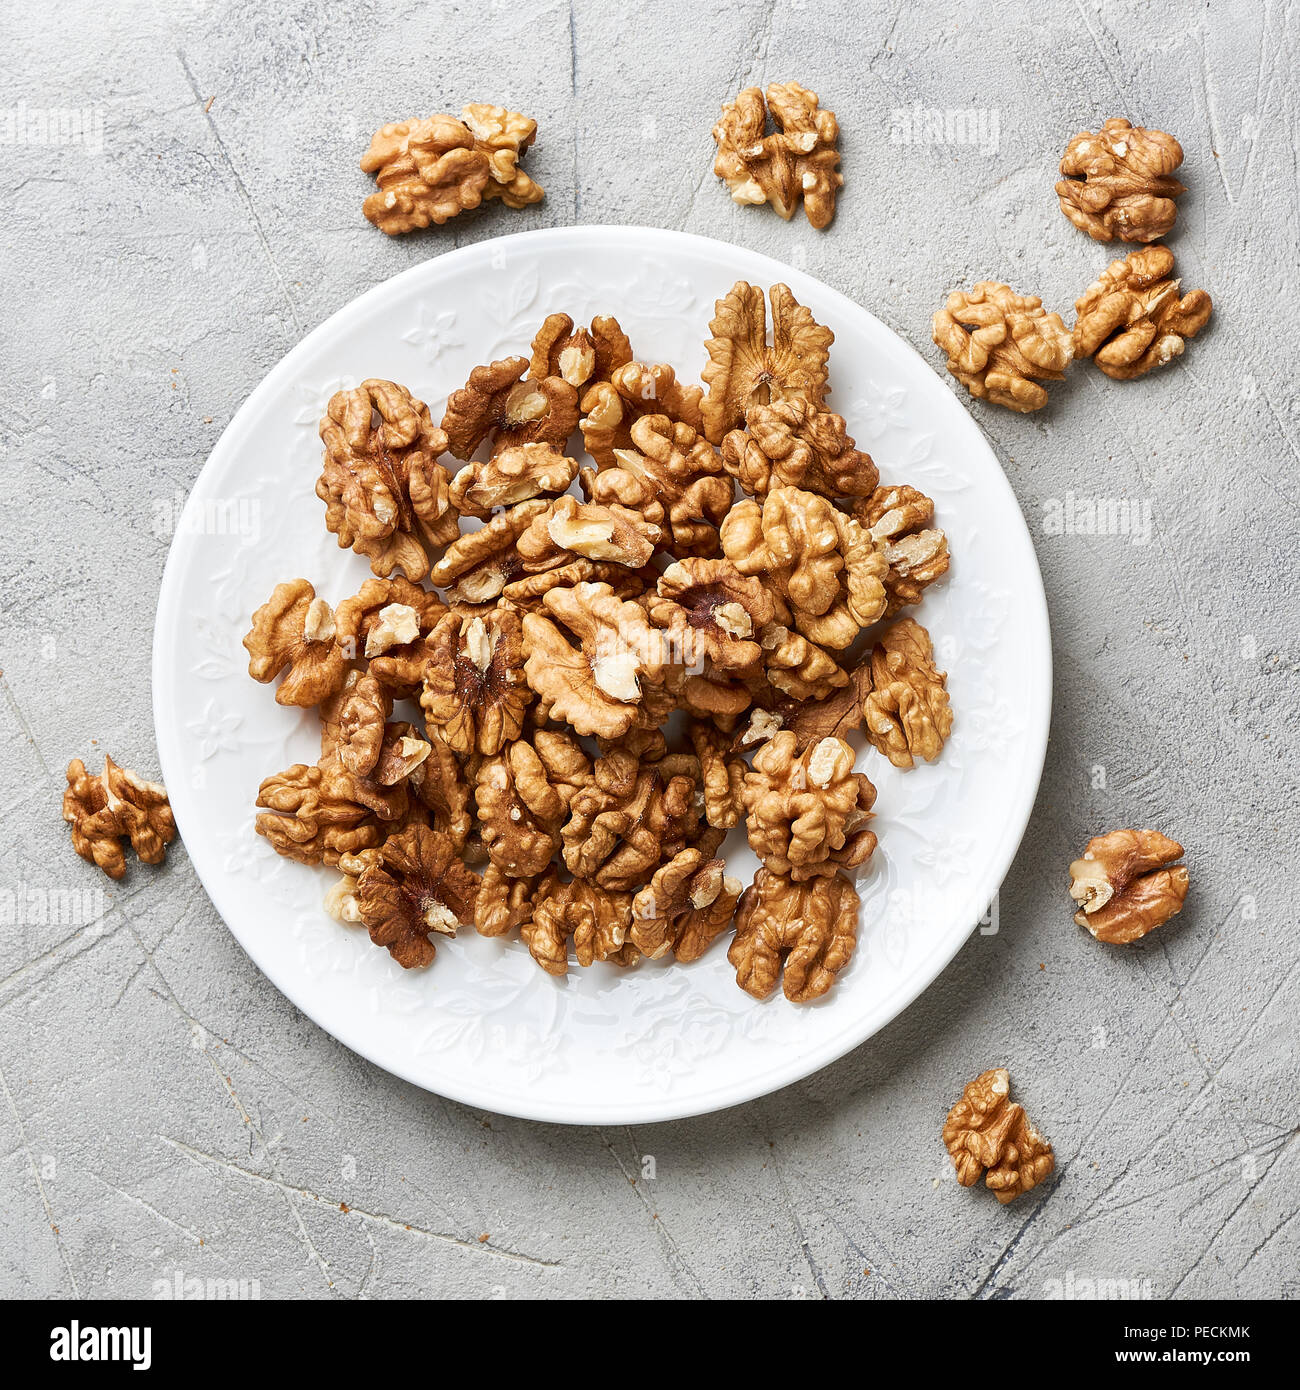 Walnut kernels on white plate over gray background. Stock Photo